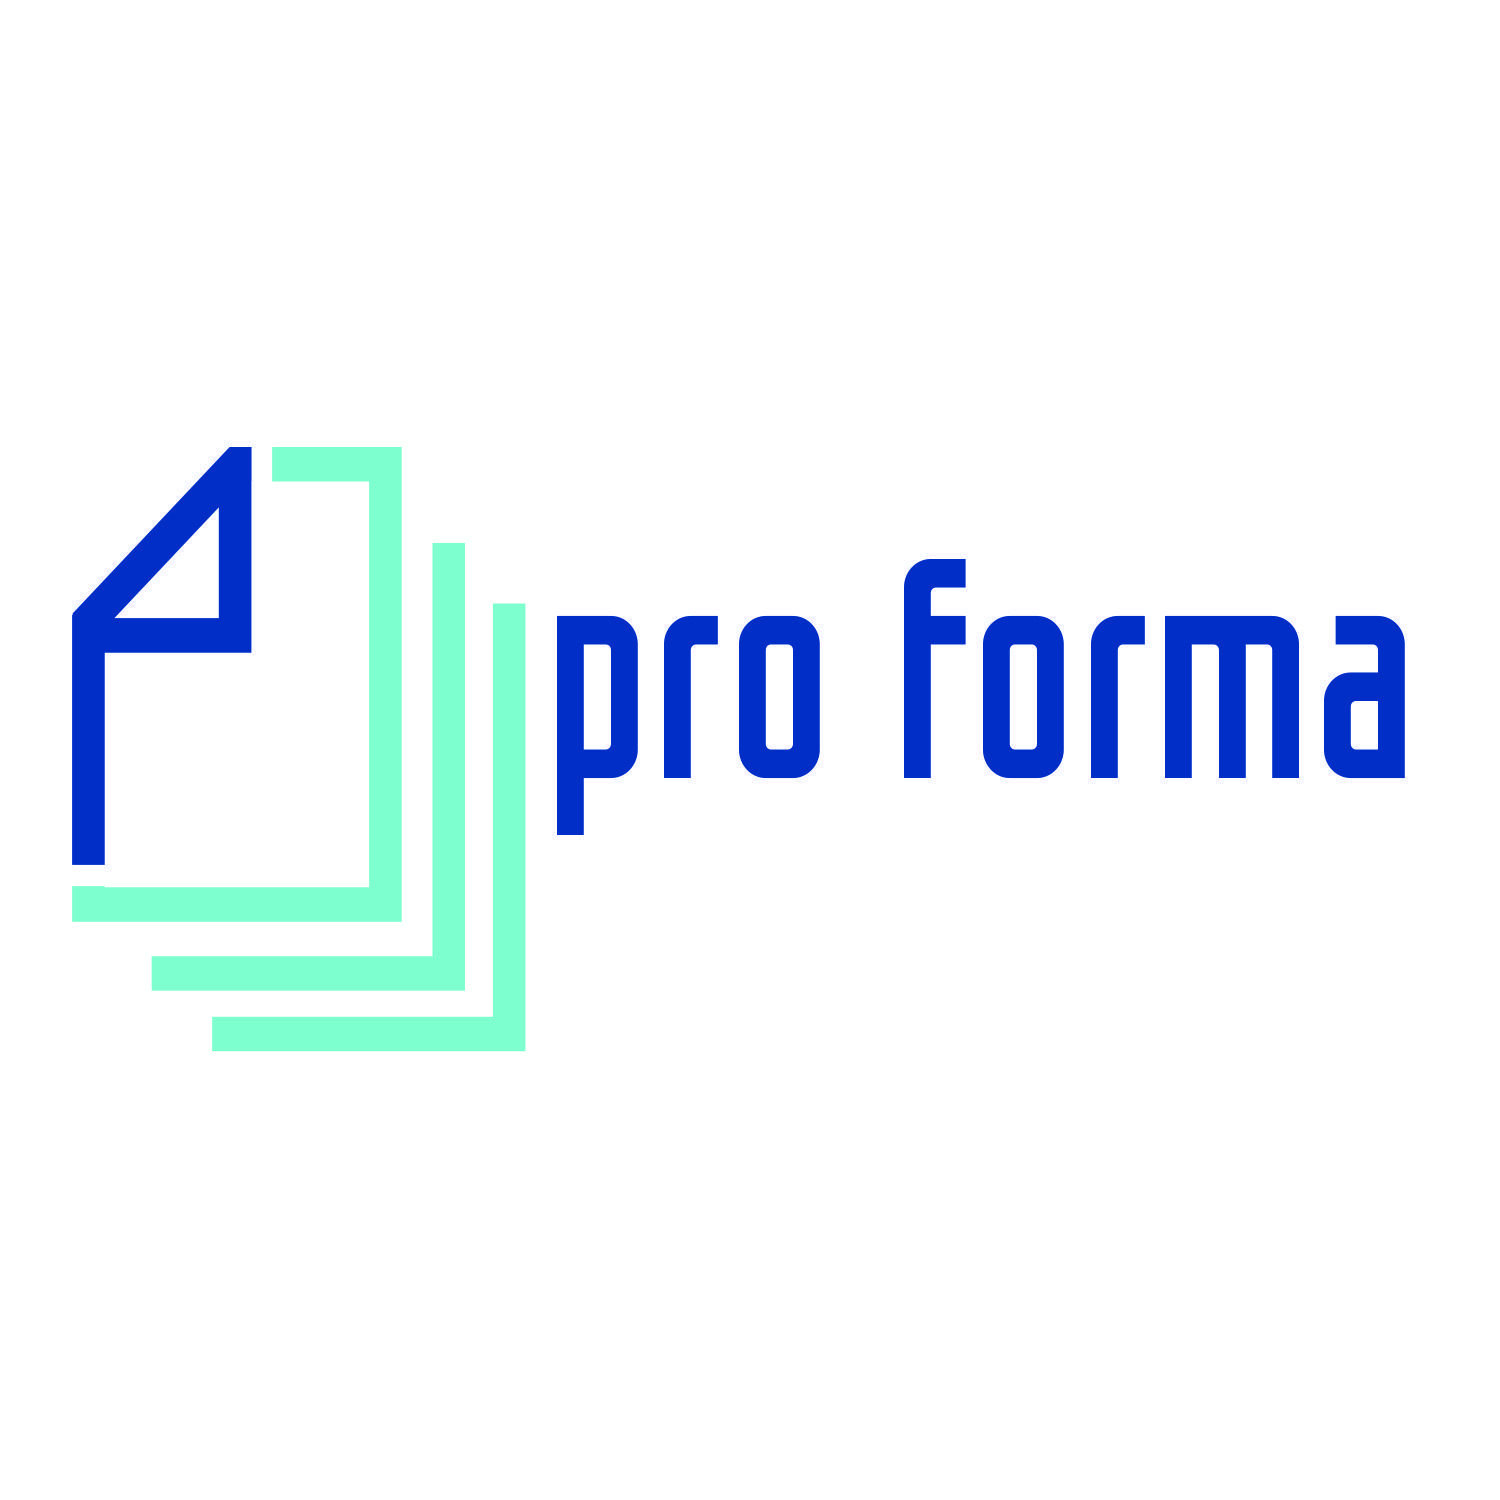 CEB Logo - Modern, Professional, Startup Logo Design for Pro Forma by ceb ...